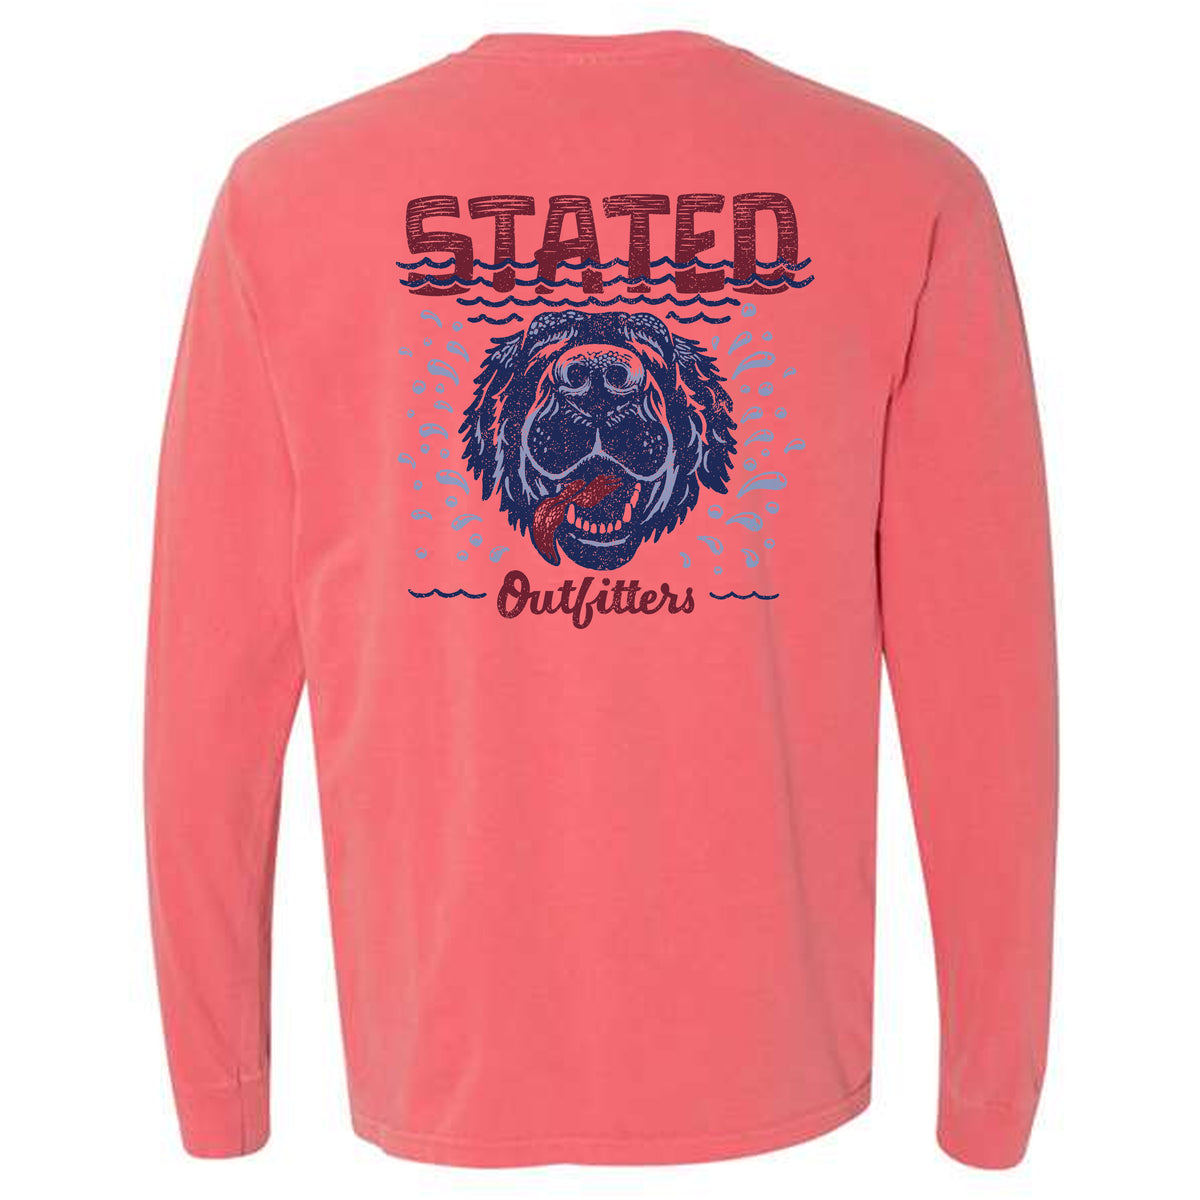 Stated Outfitters Wet Dog Long Sleeve